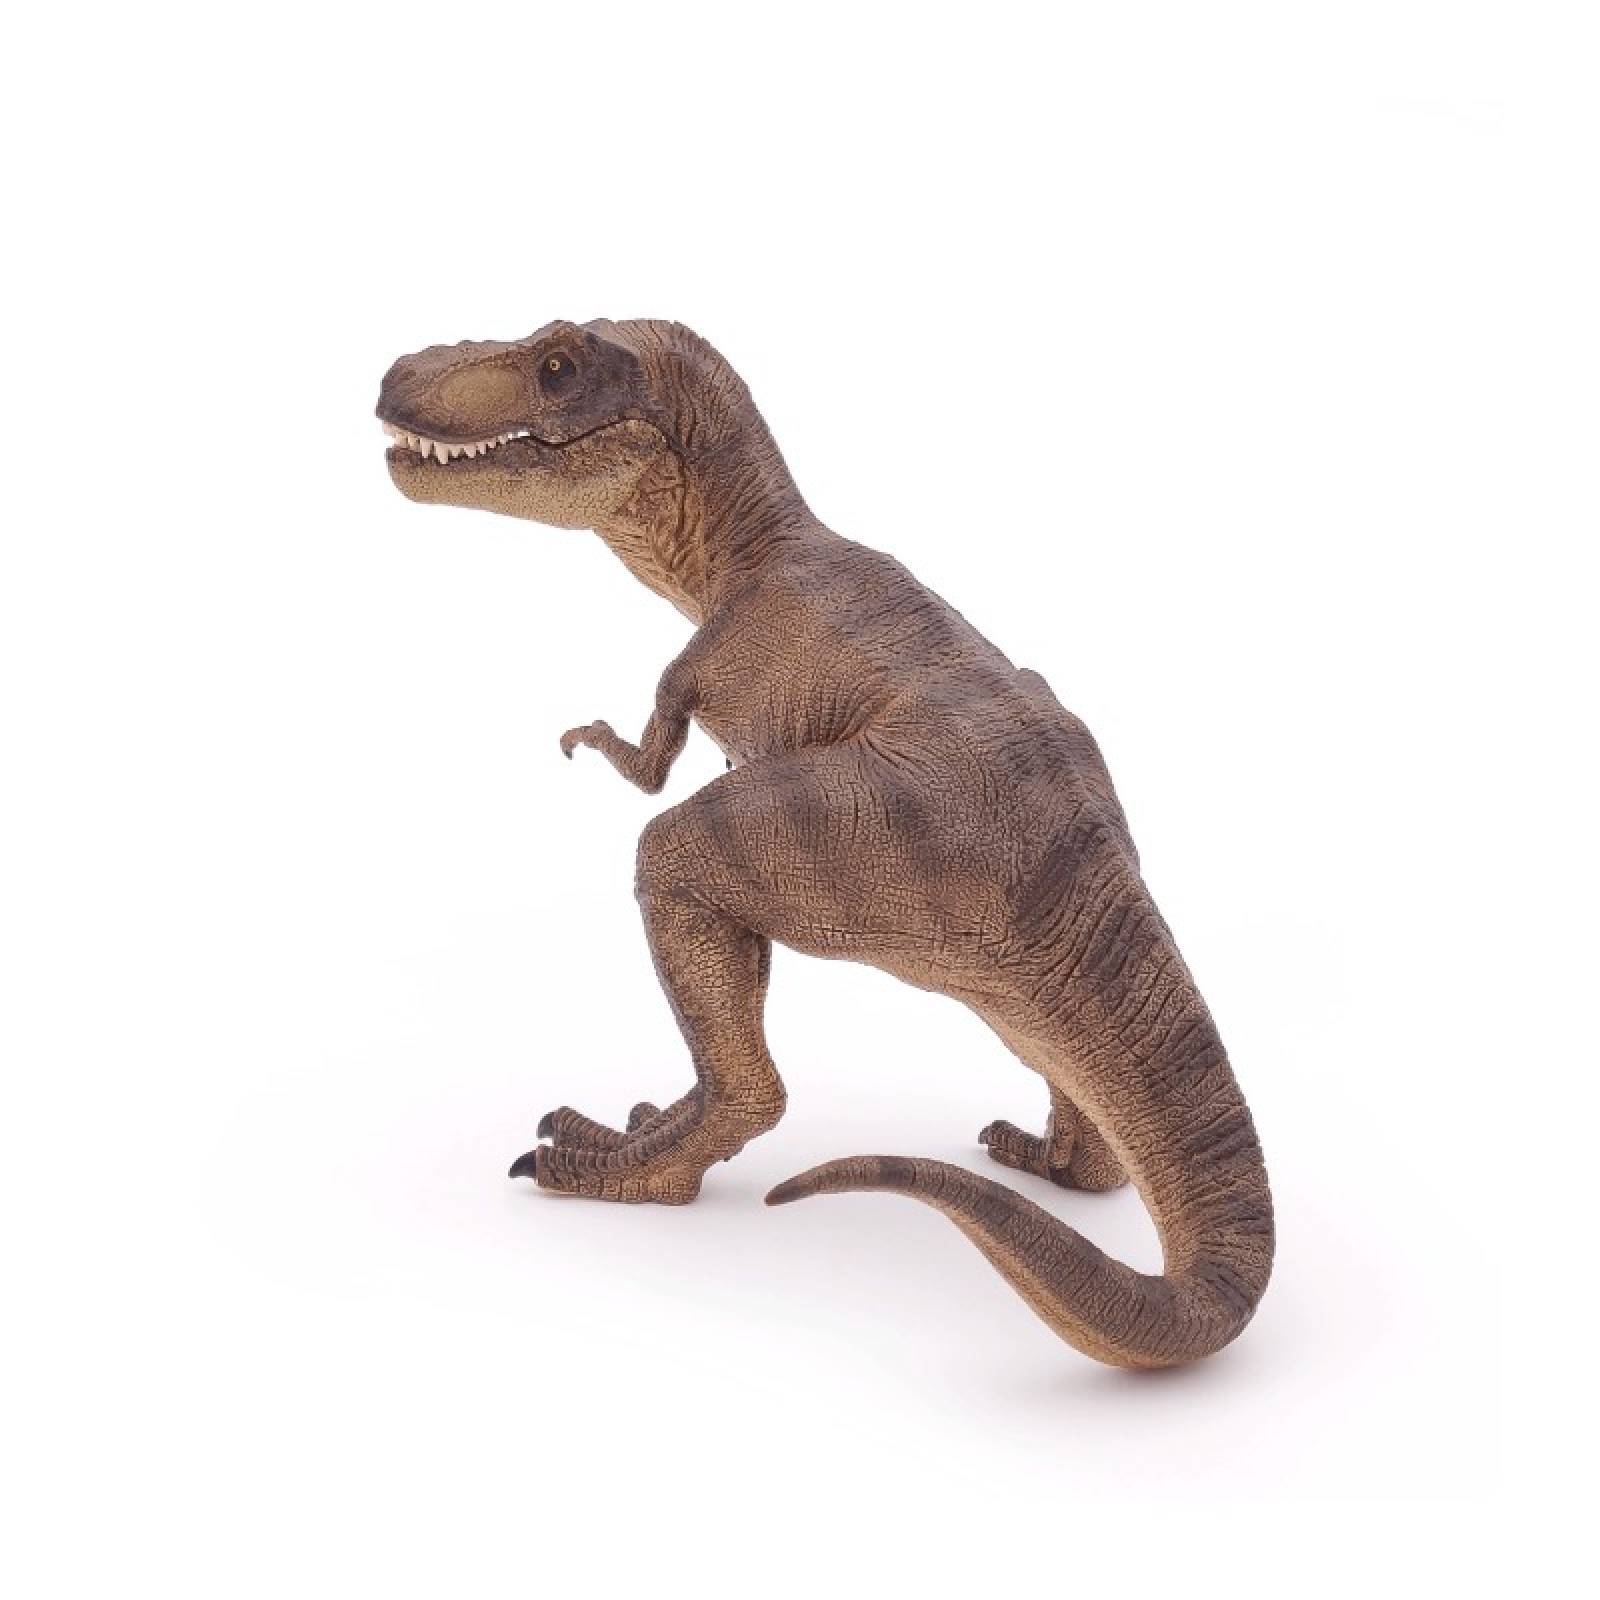 T-Rex With Moving Mouth - Papo Dinosaur Figure thumbnails